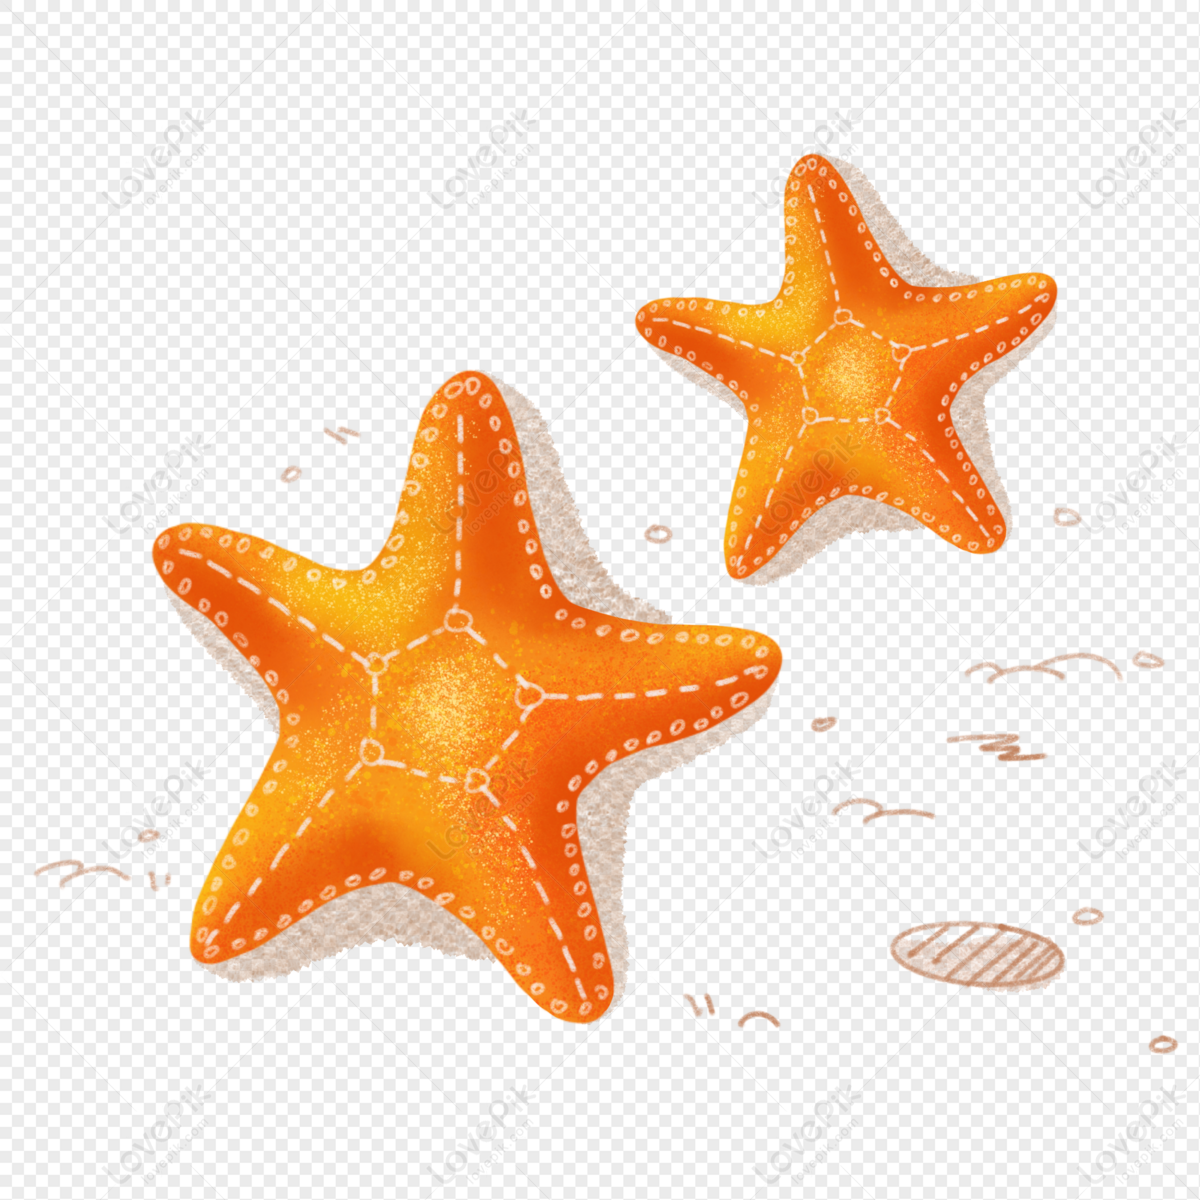 Starfish Cartoon Hand Drawn Free PNG And Clipart Image For Free Download -  Lovepik | 401352779